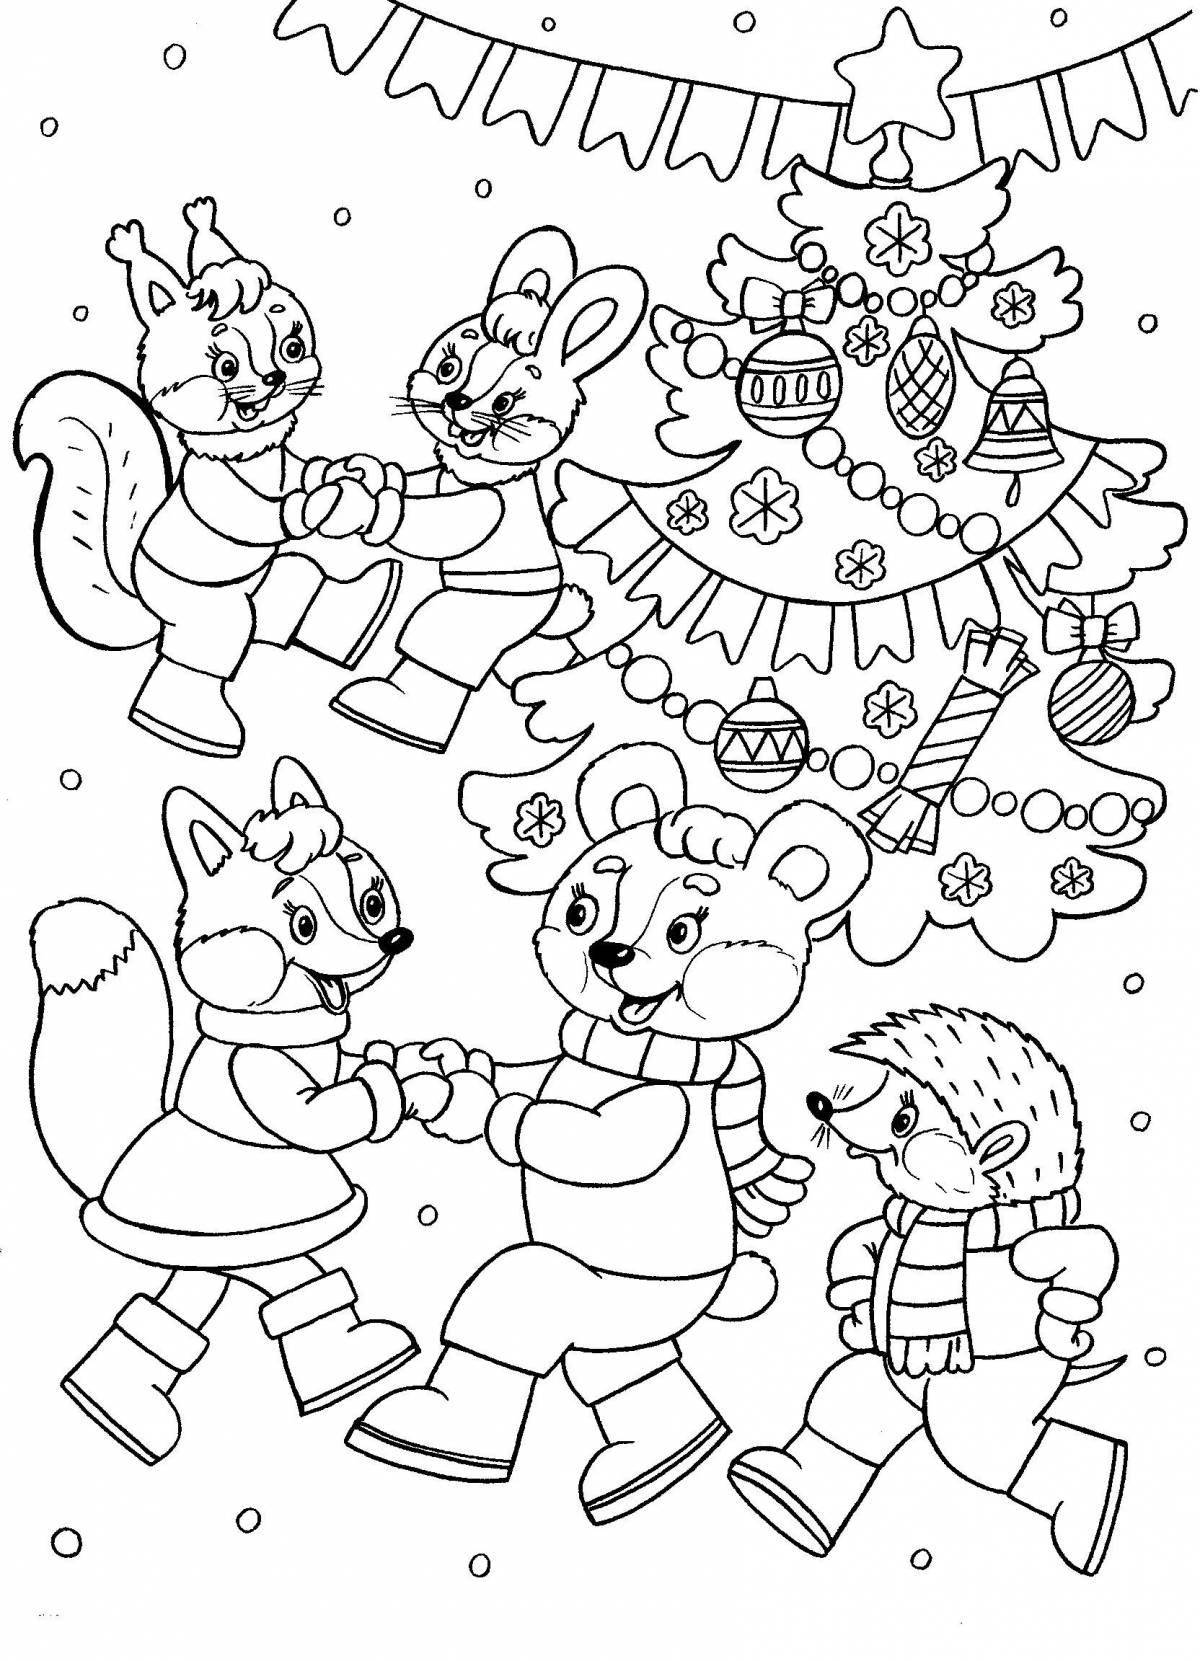 Live Christmas coloring book for children 6-7 years old